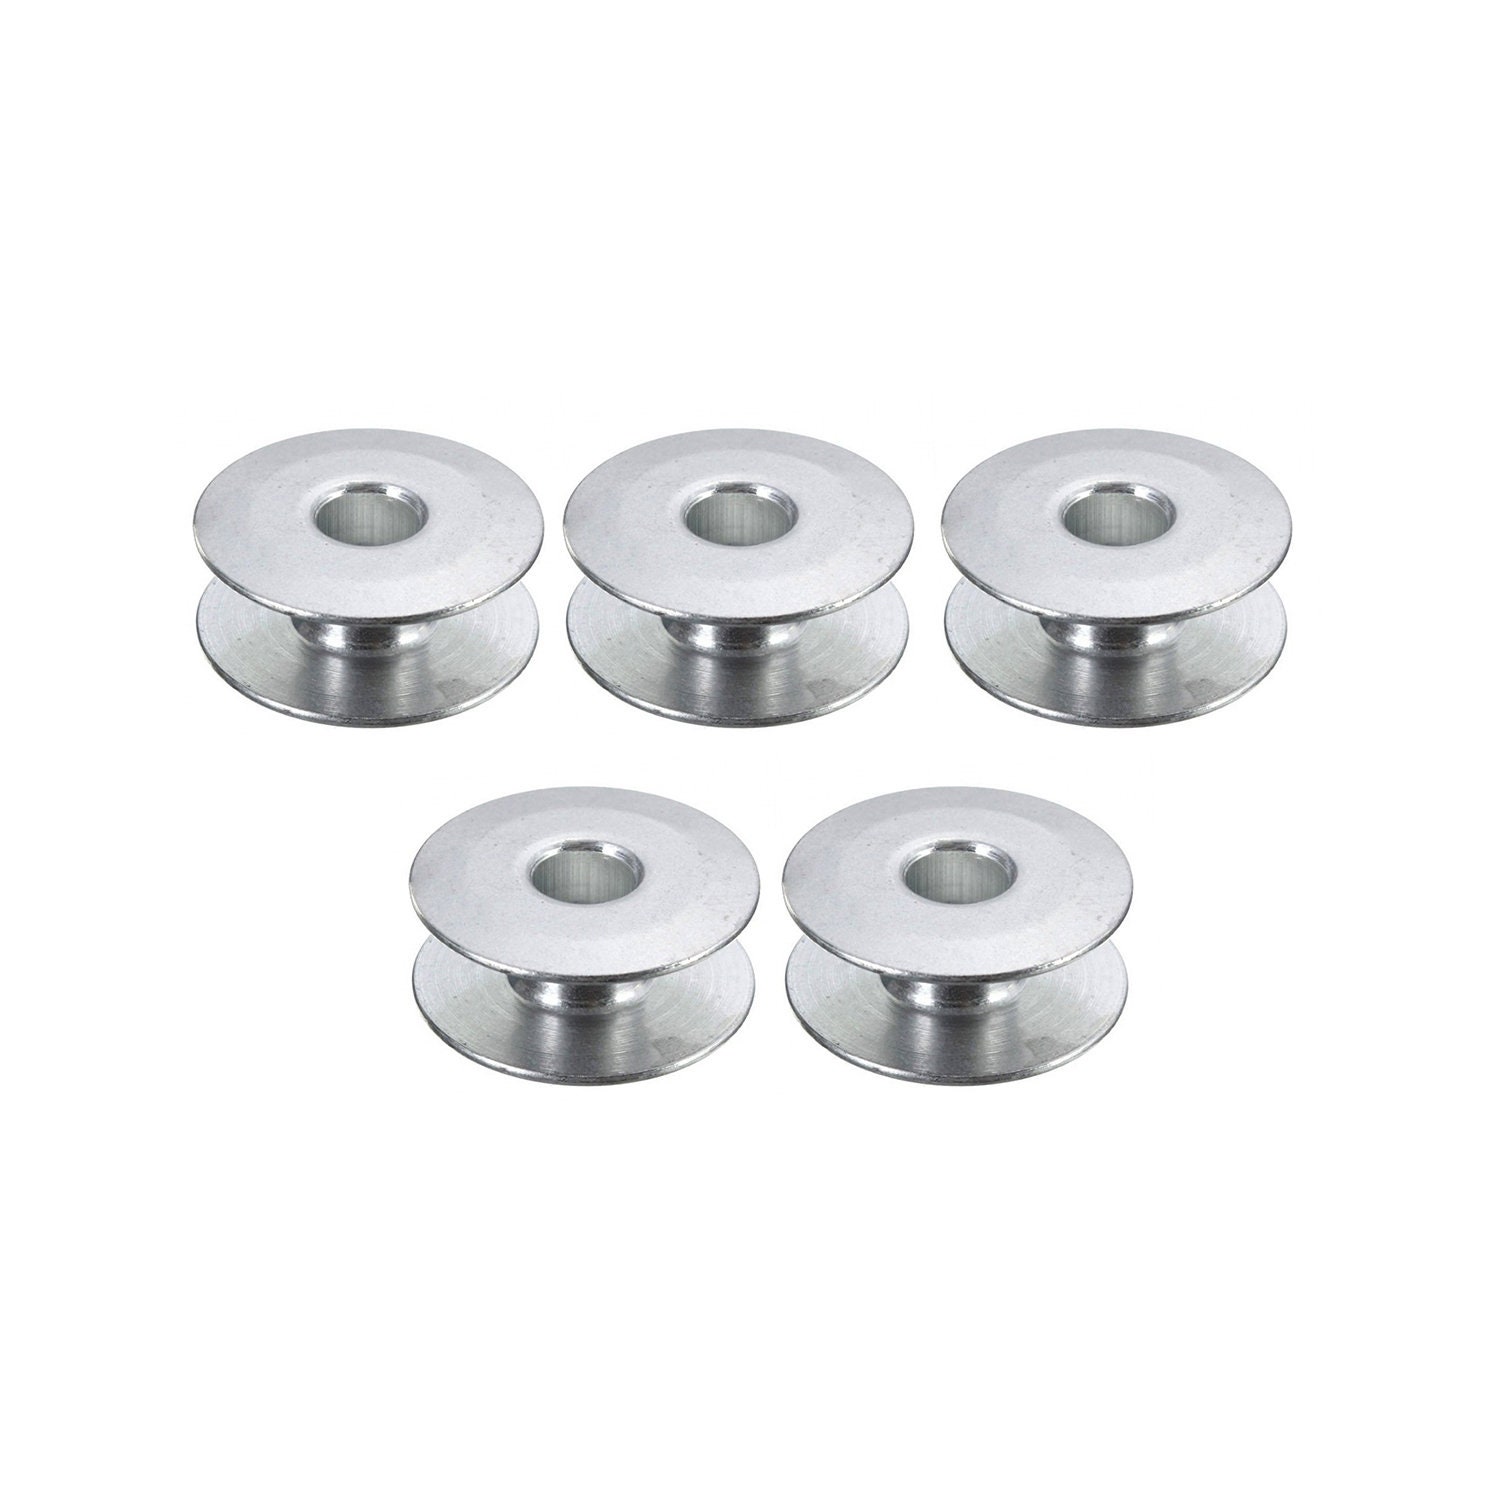 Sewing Machine BOBBINS for House/ Industrial Sewing Machine Spool Universal  Fits Most Brands, Brother, Singer, Janome, Newhome, Juki, Consew 